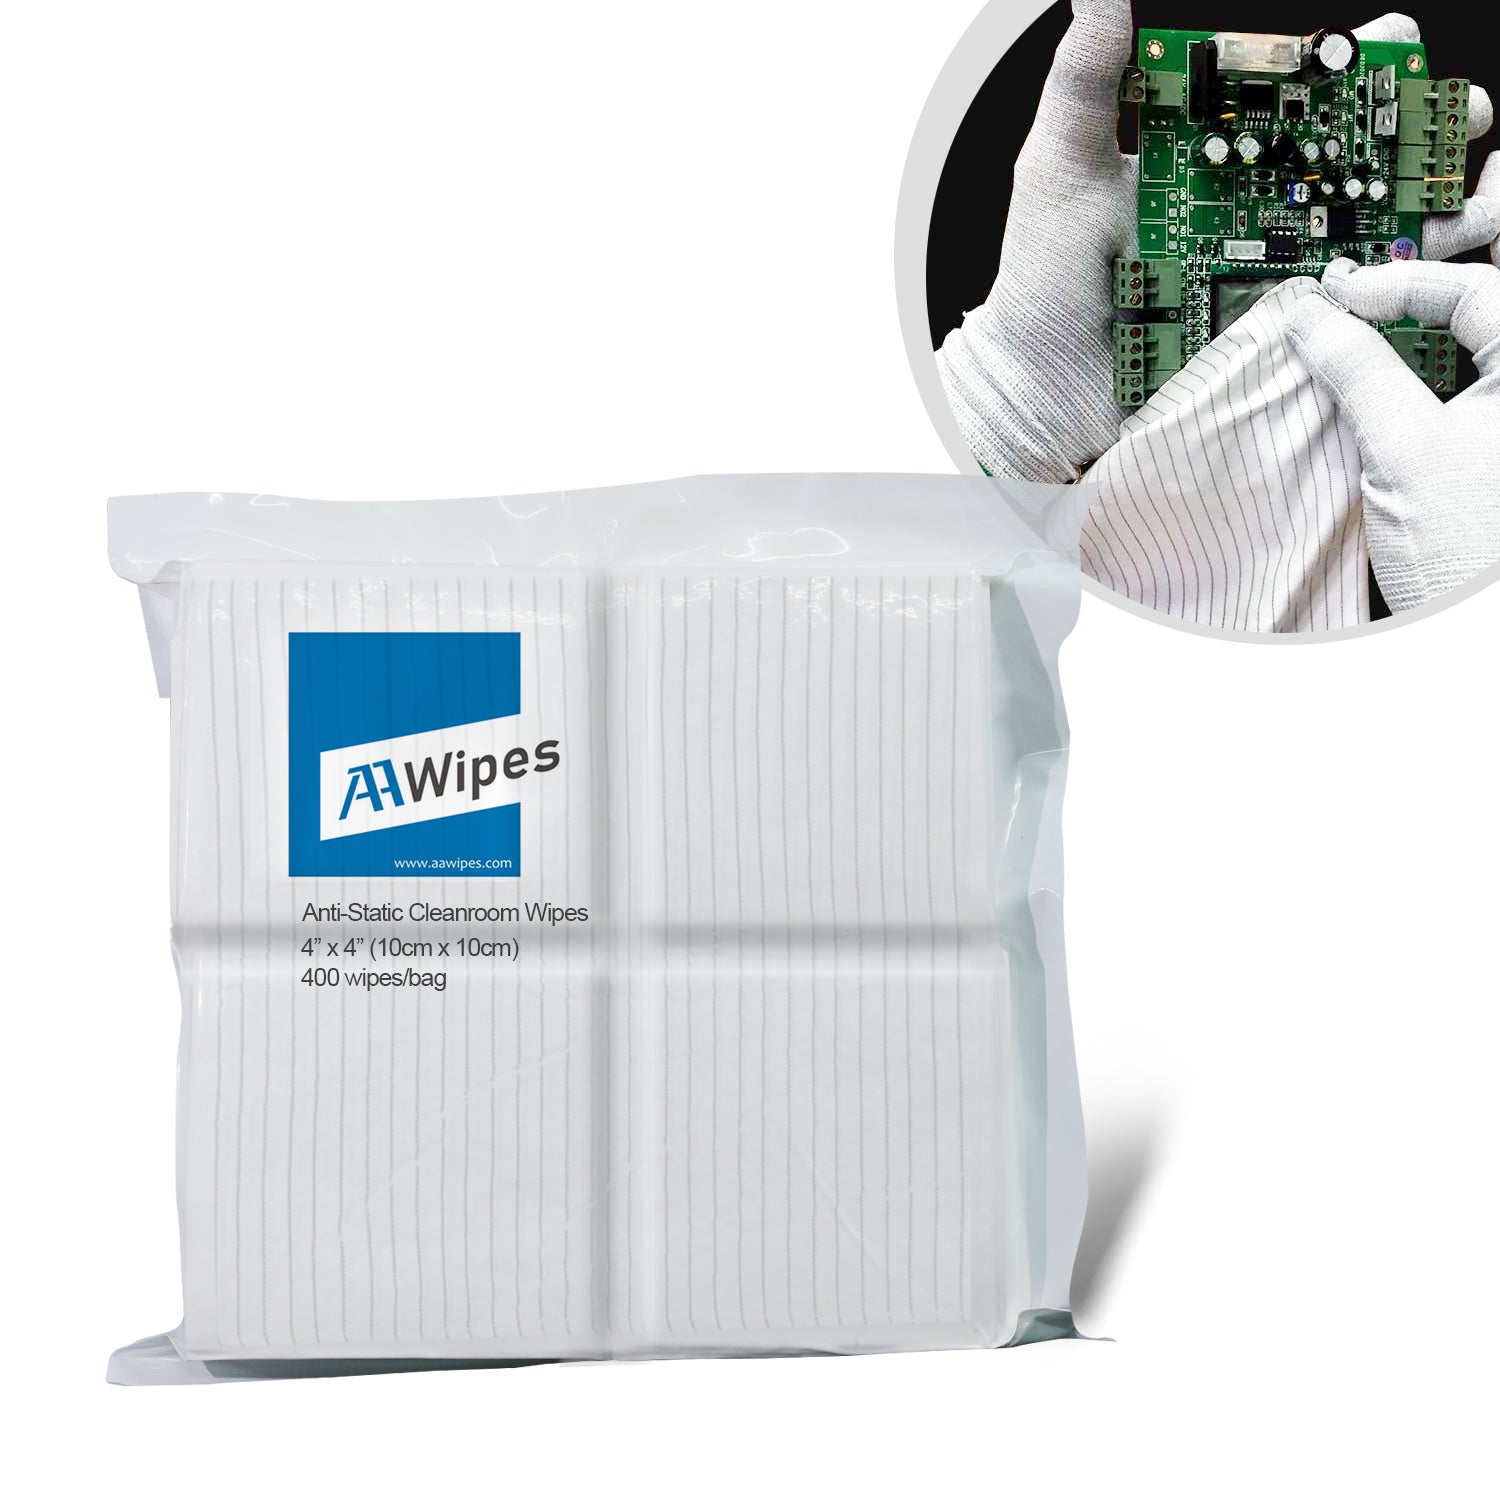 Cleanroom Anti-Static ESD Wipes 4"x4" (Starting at 1 Box with 8,000 Wipes per 20 Bags) (No. CE16004)